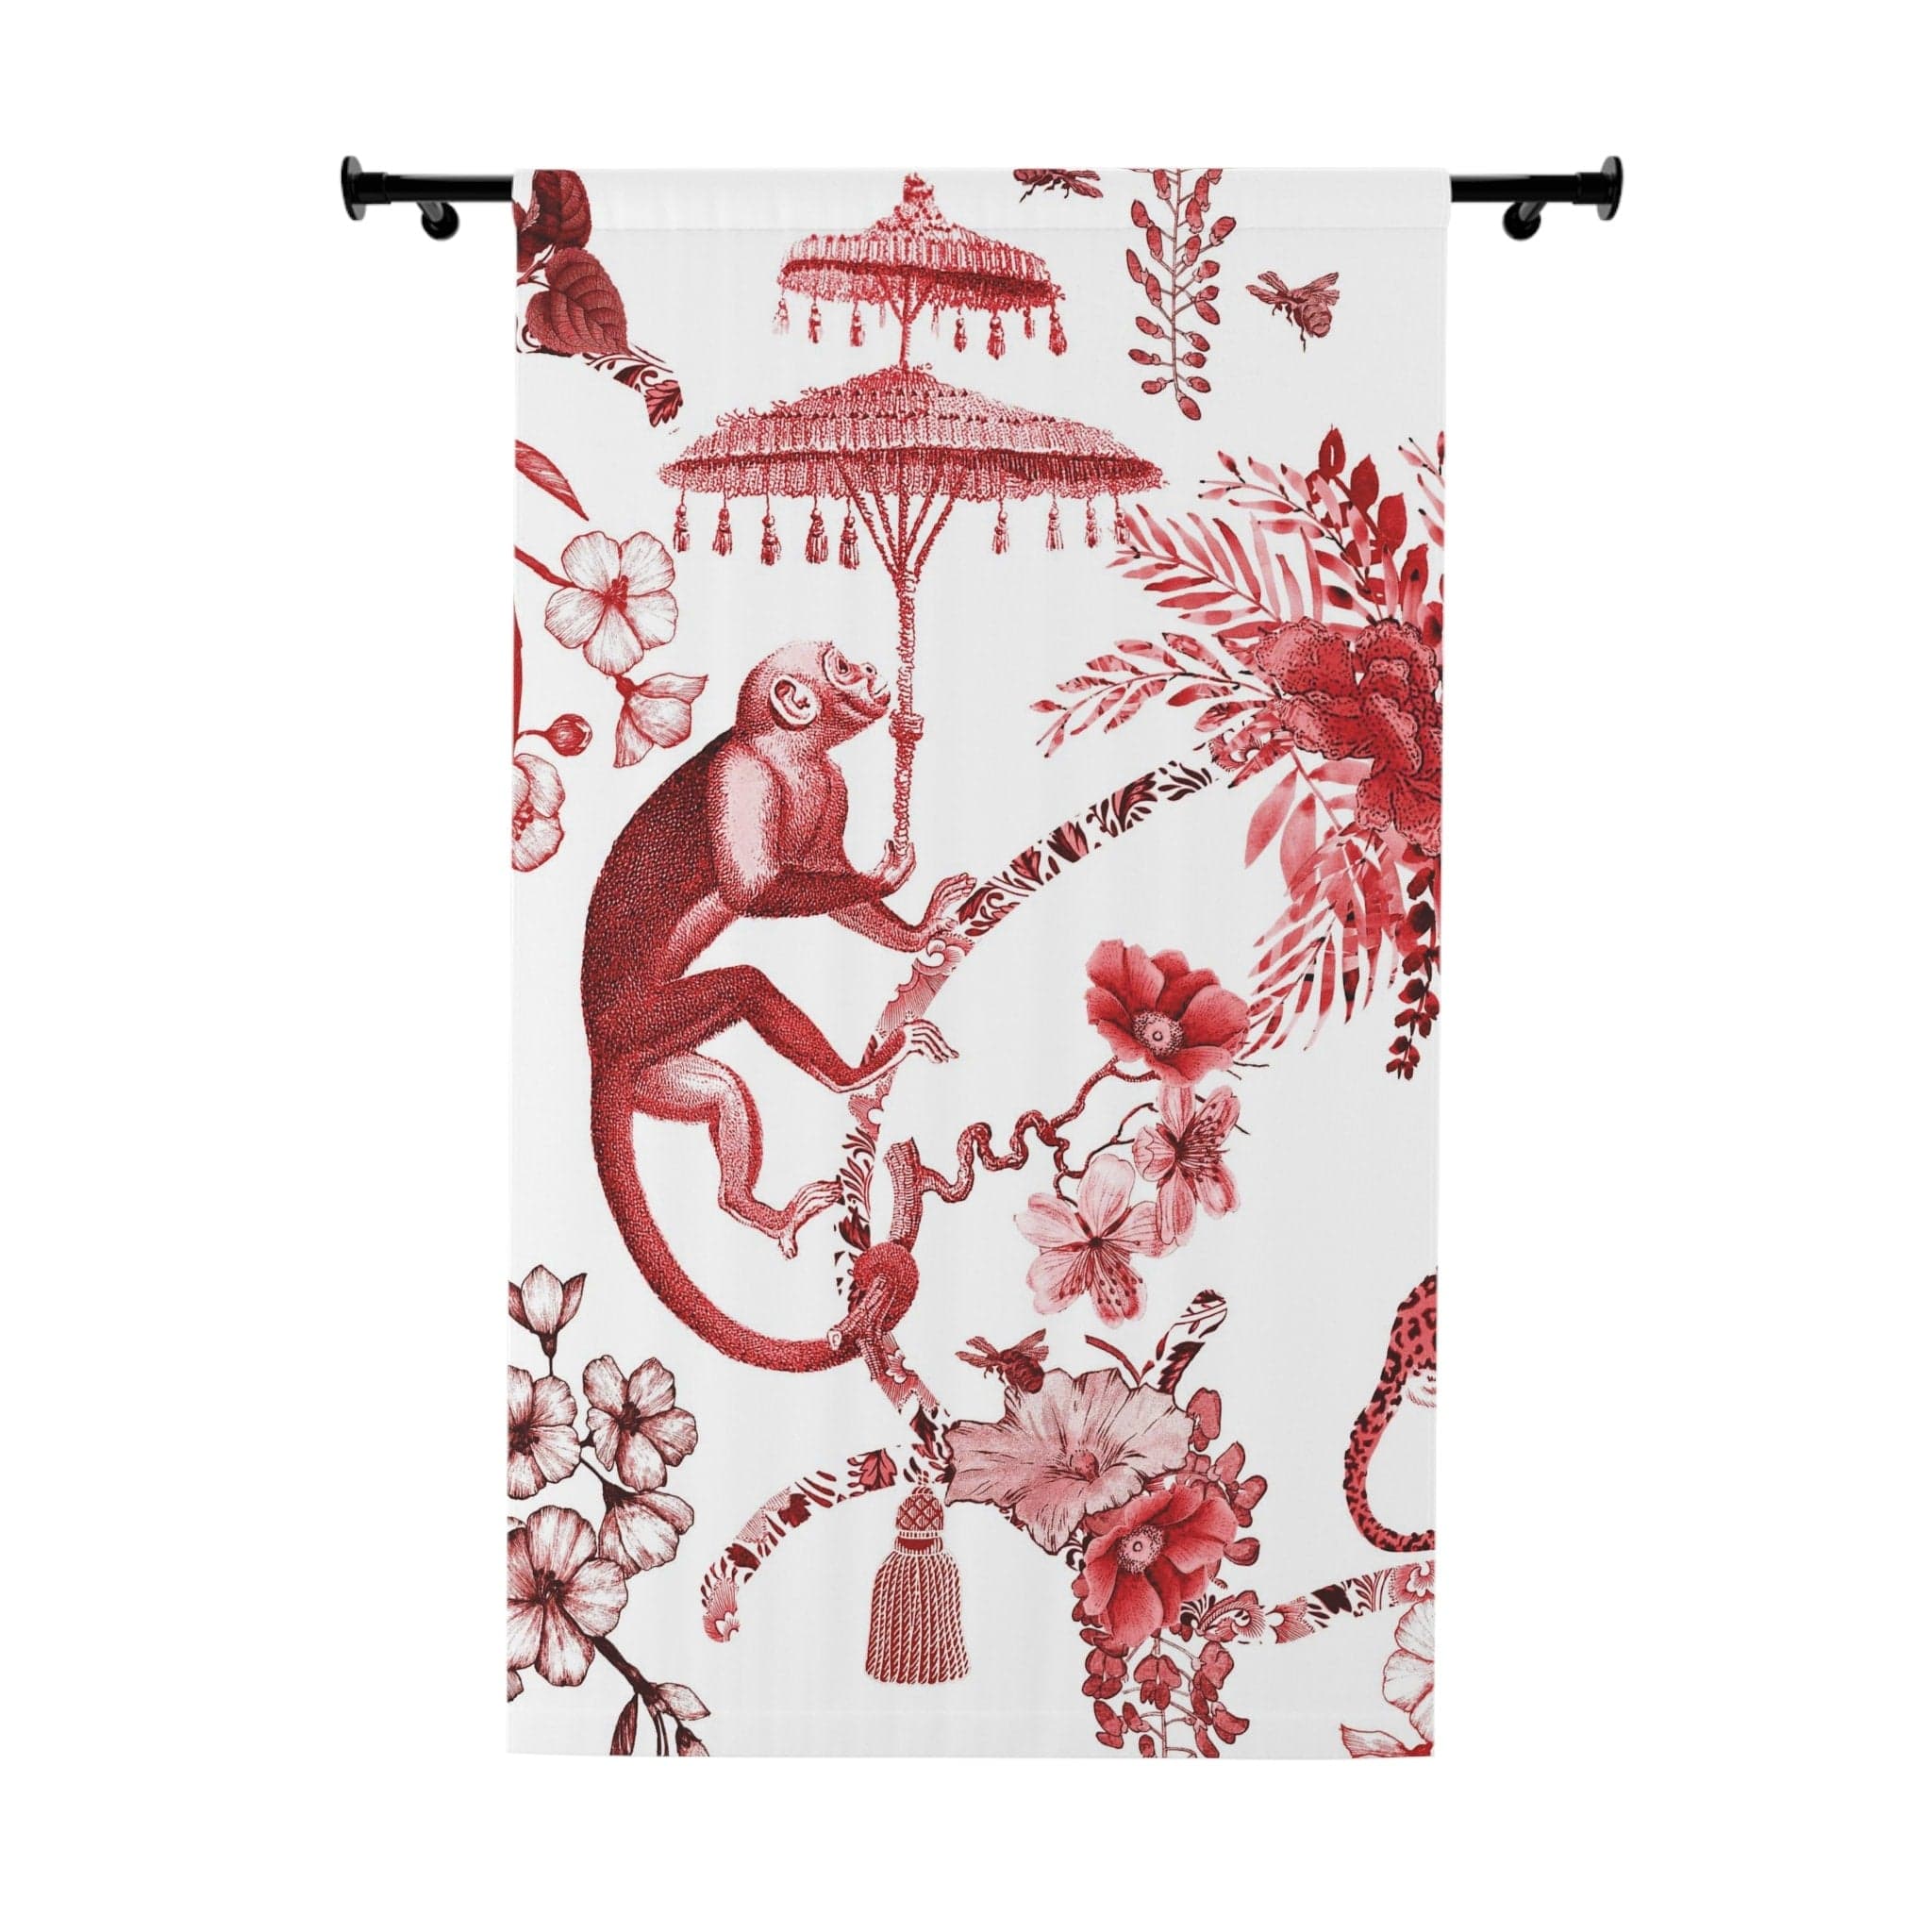 Kate McEnroe New York Chinoiserie Jungle Botanical Toile Window Curtains, Red, White Chinoiserie Floral Drapes, Country Farmhouse Decor - 131482623 Window Curtains